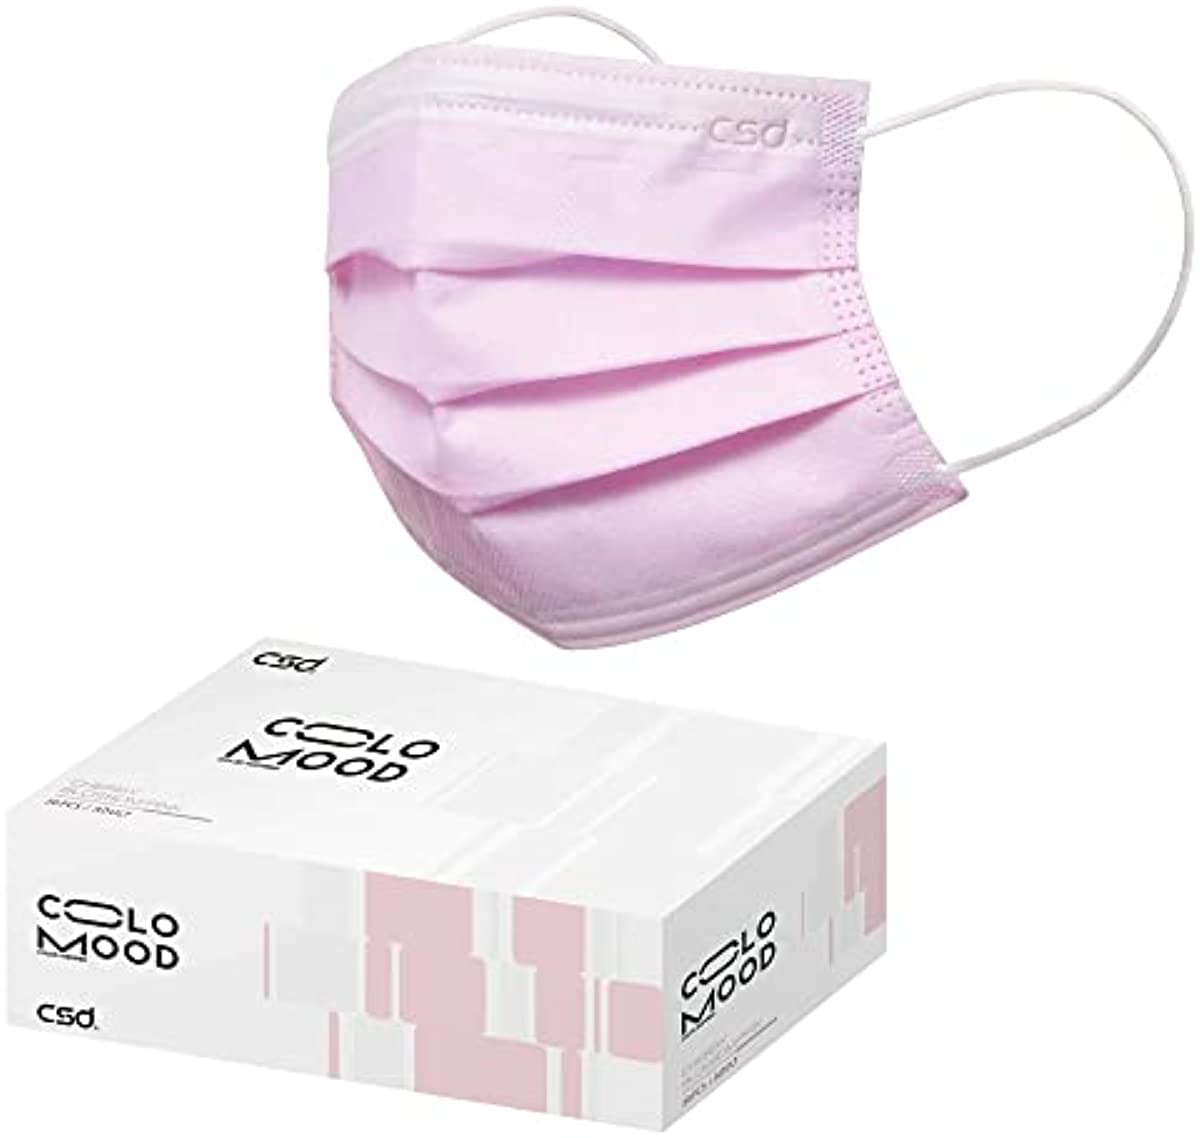 CSD Colo Mood Disposable Face Mask, 3 Ply Filter Protection with Colored Elastic Earloop, Breathable and Fashionable for Adult, Cherry Blossom Pink 30 Pcs/Box